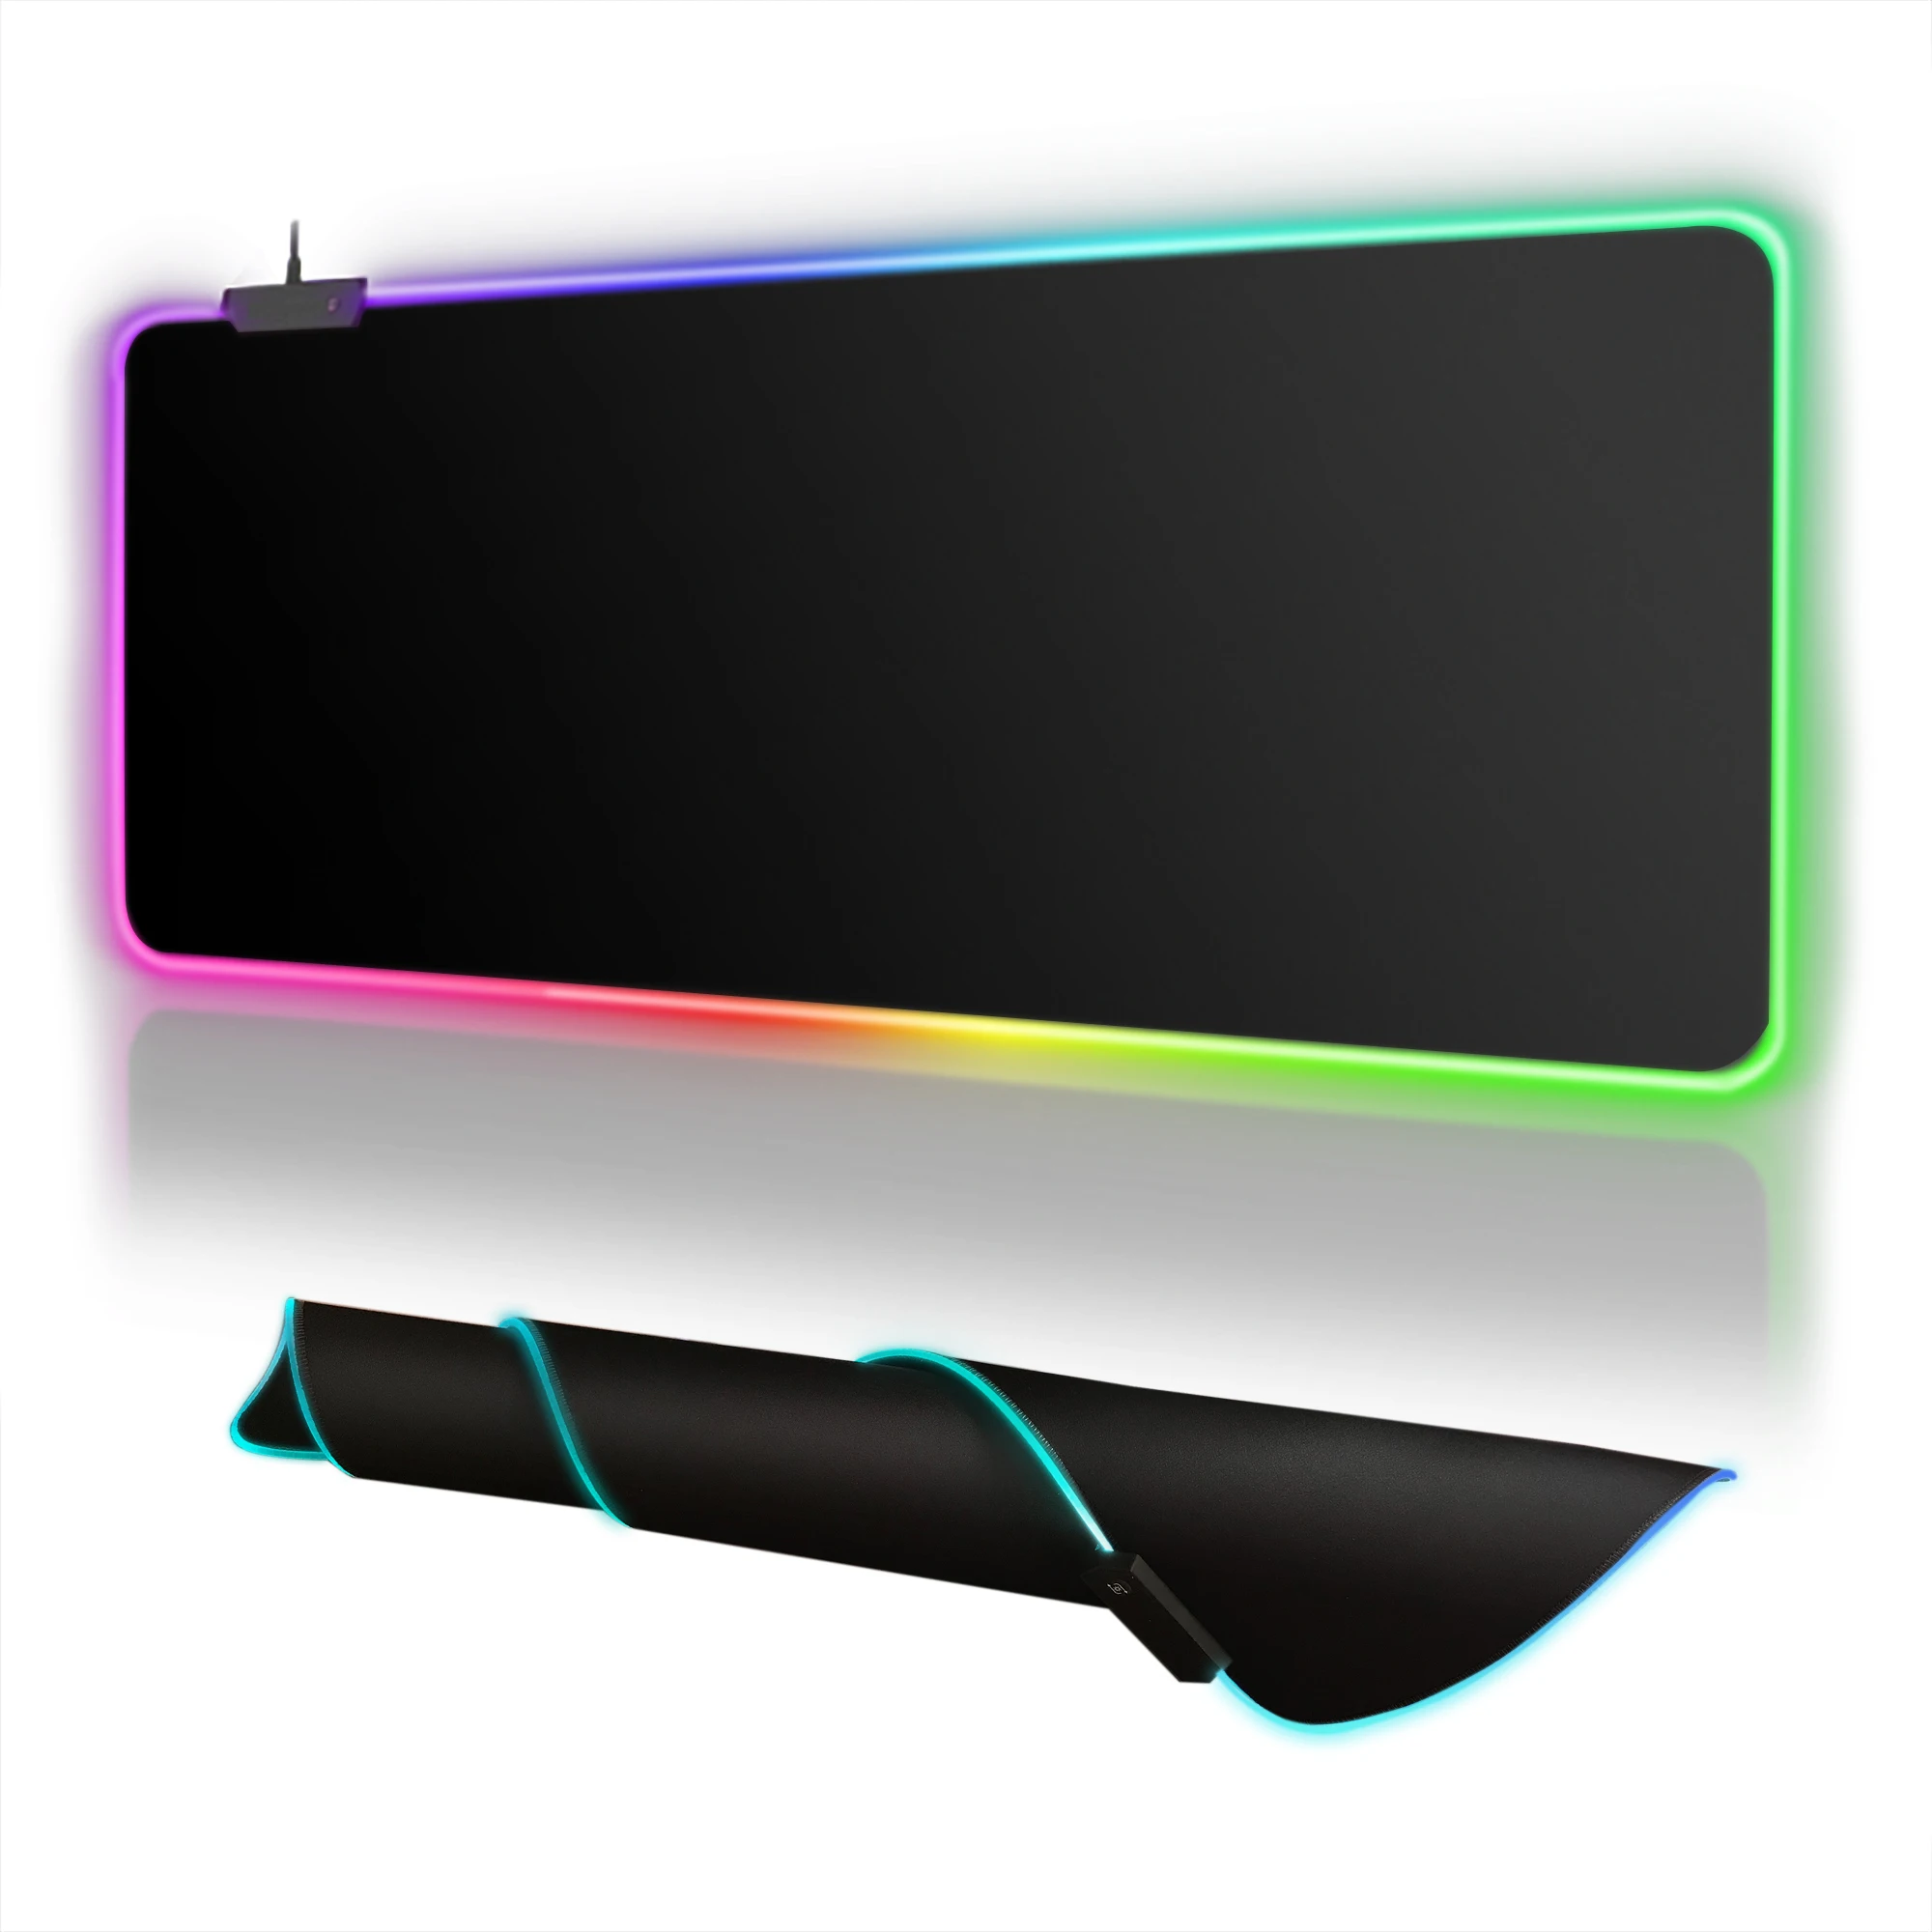 All black RGB Non-Slip Gaming Mousepad For PC Laptop Gamer, Large/Medium/Small Keyboard Carpet Mat Mouse Pad Rubber Table Rug